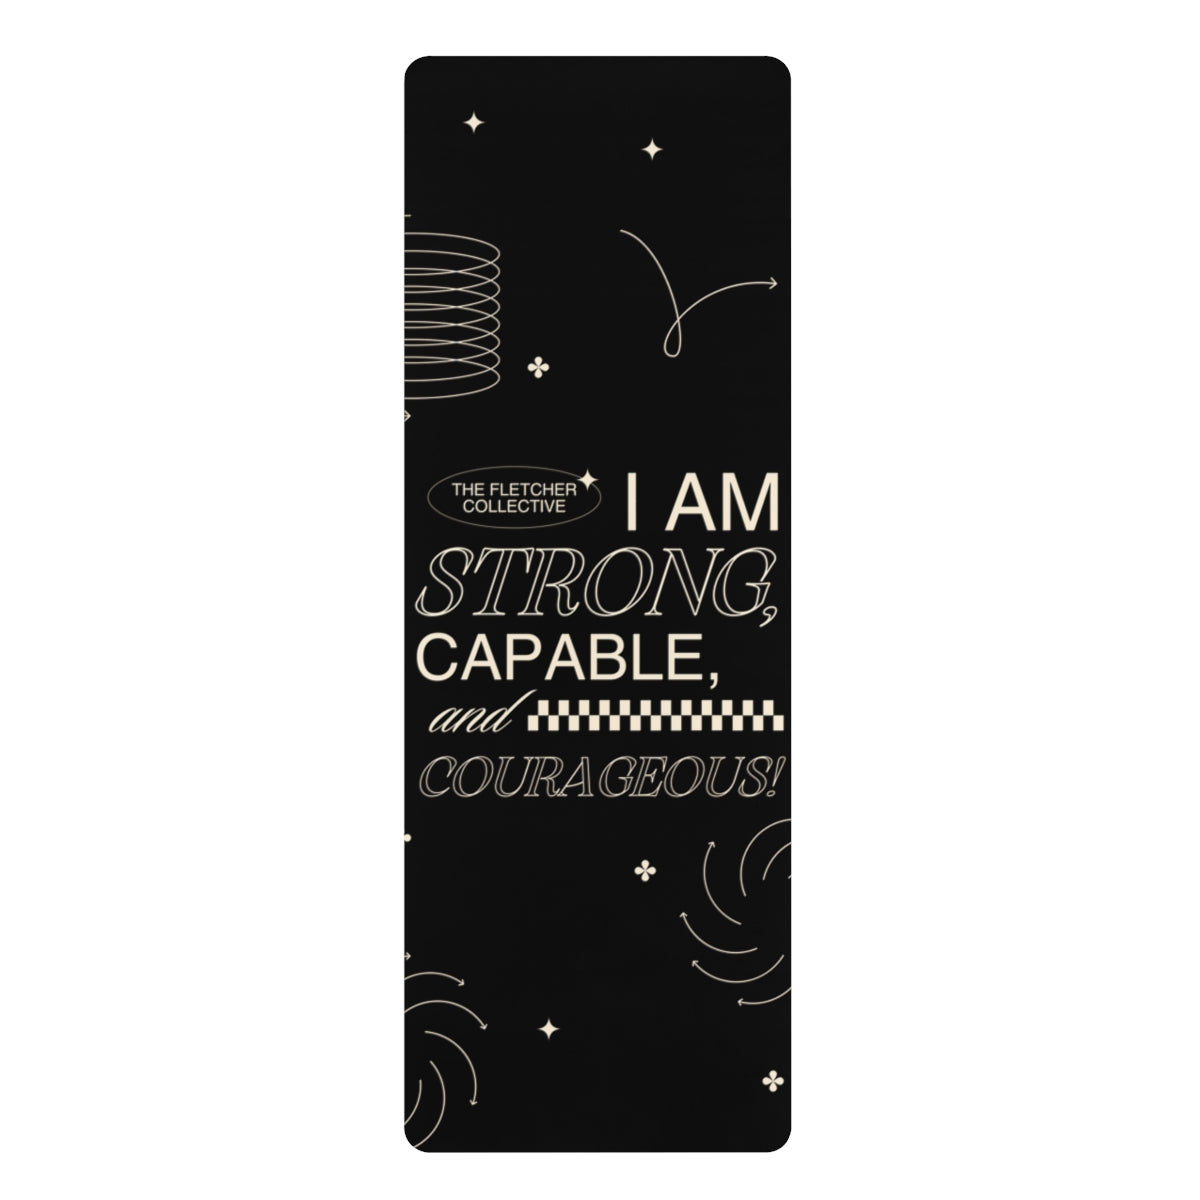 Strong, Capable, and Courageous Rubber Yoga Mat